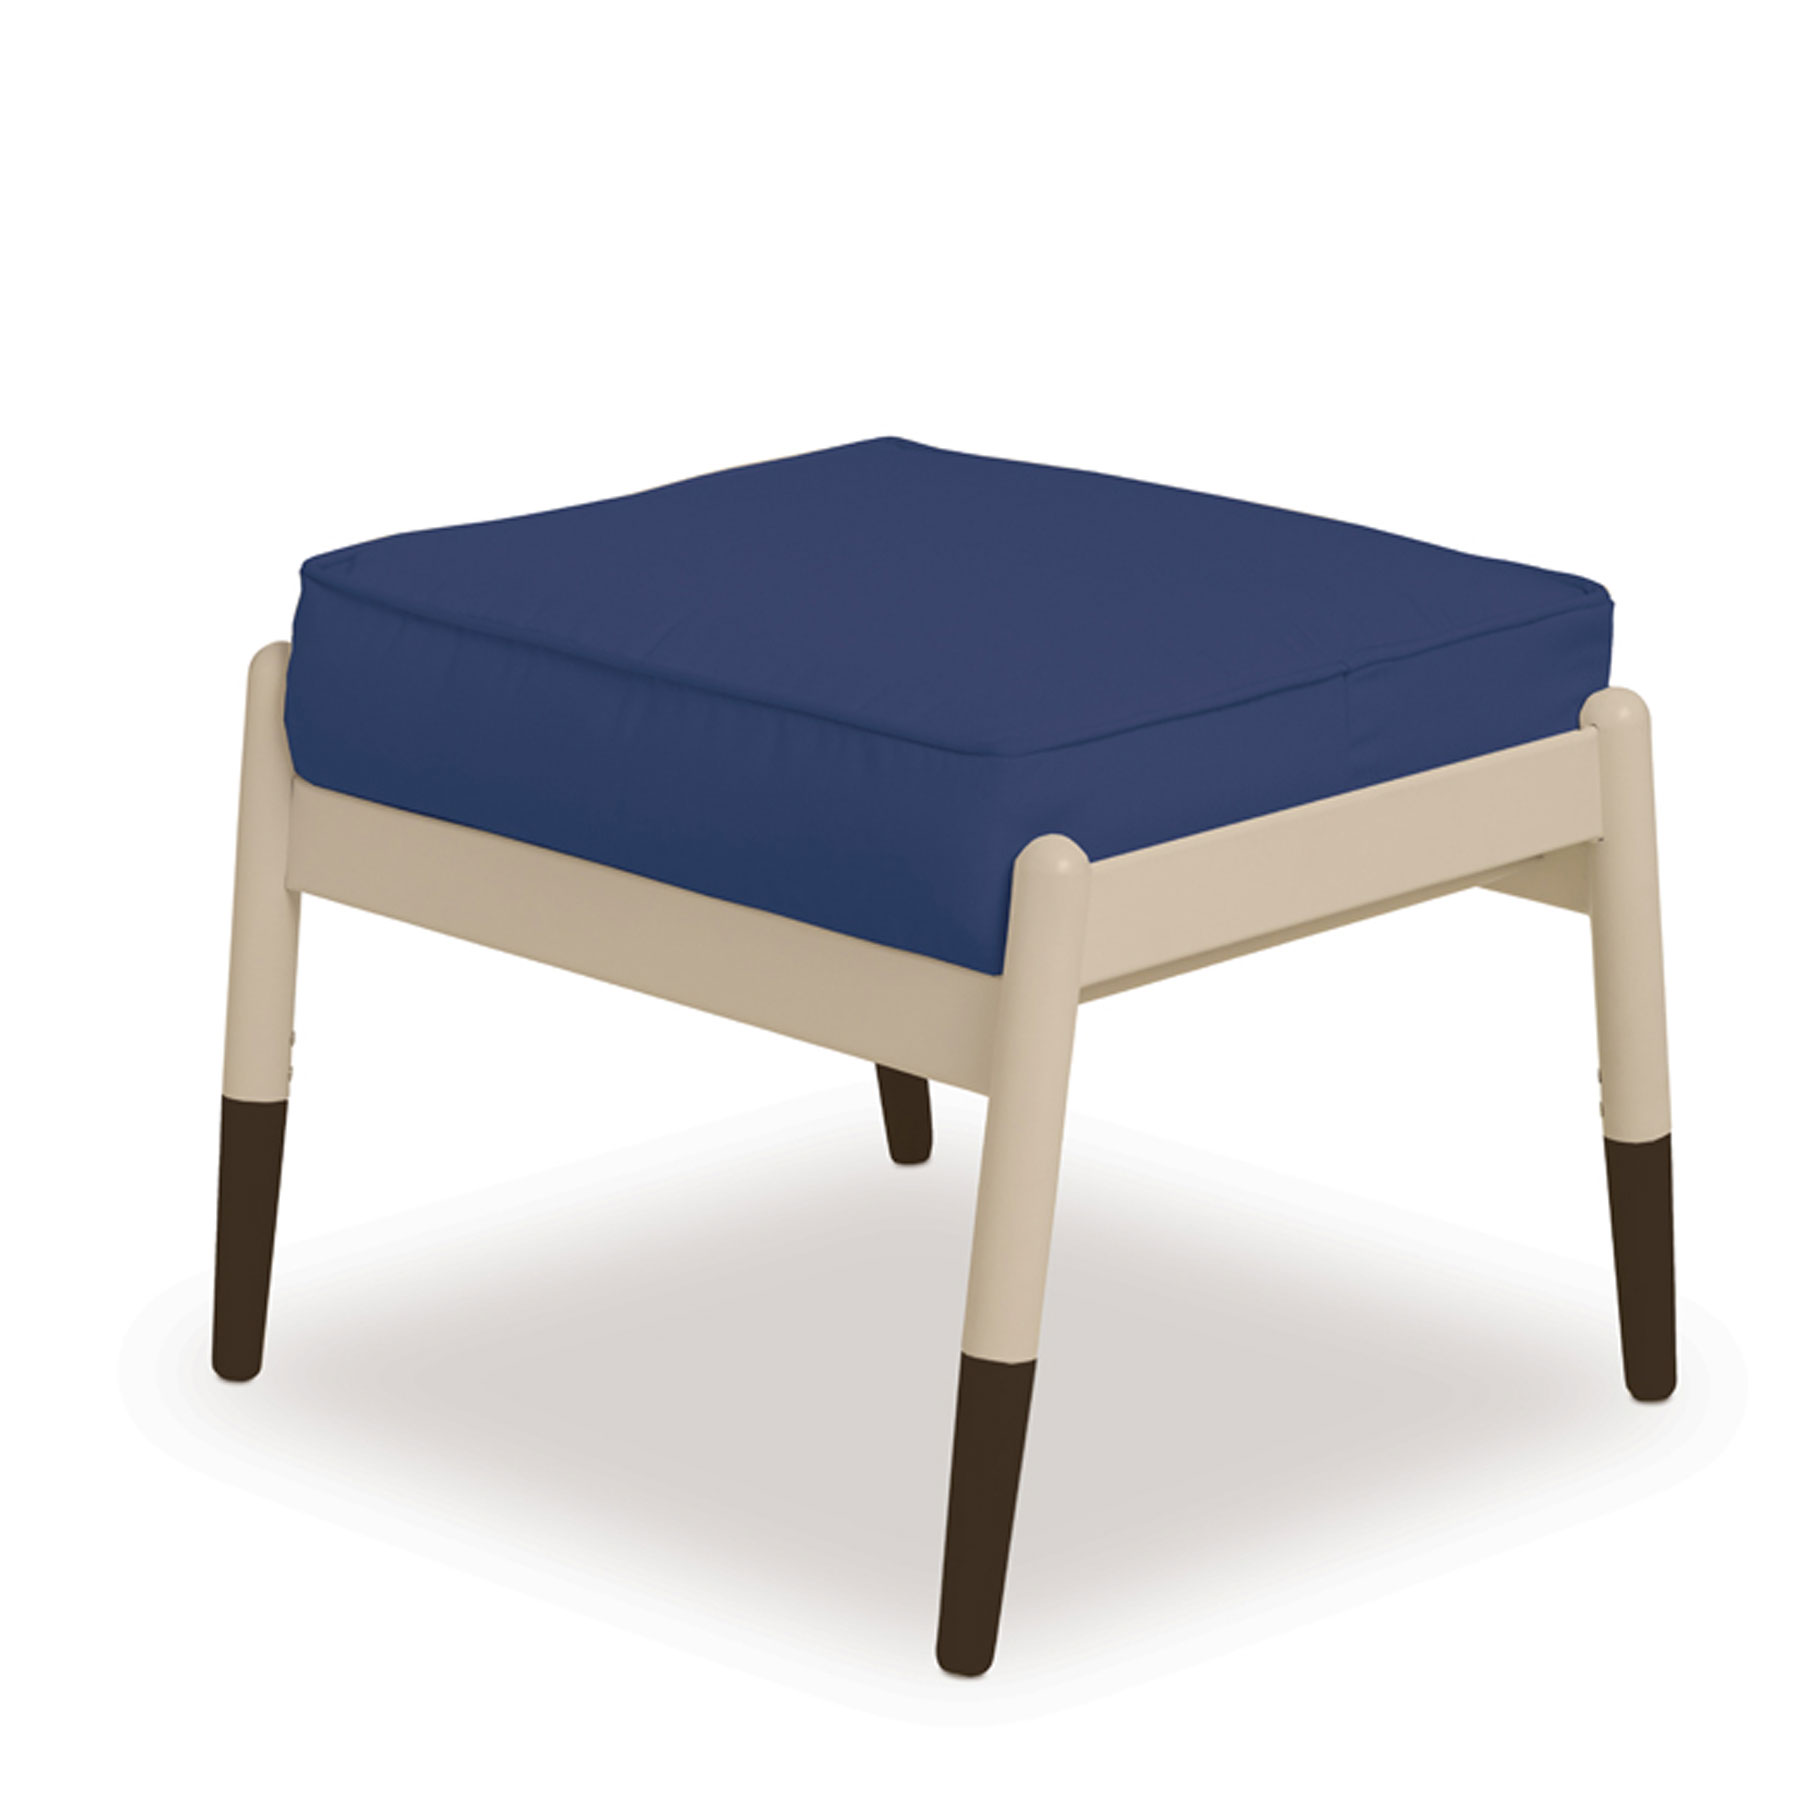 Telescope Casual Welles Cushion Ottoman with Welting